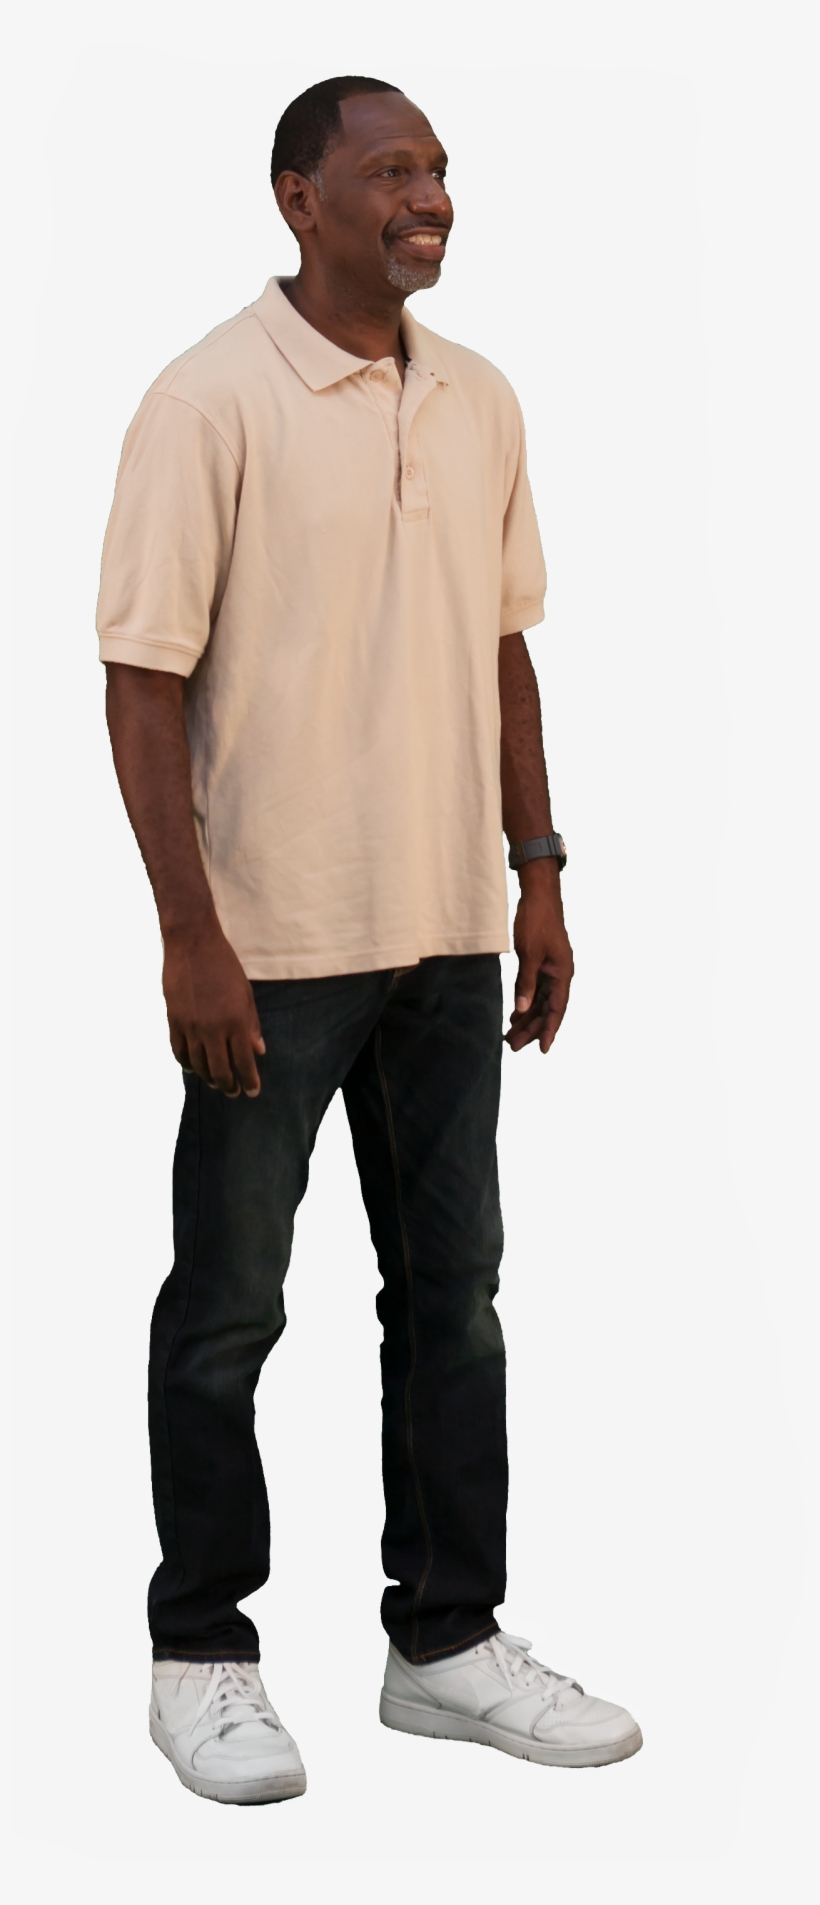 2d Cut Out People Casual V - Man, transparent png #9044066